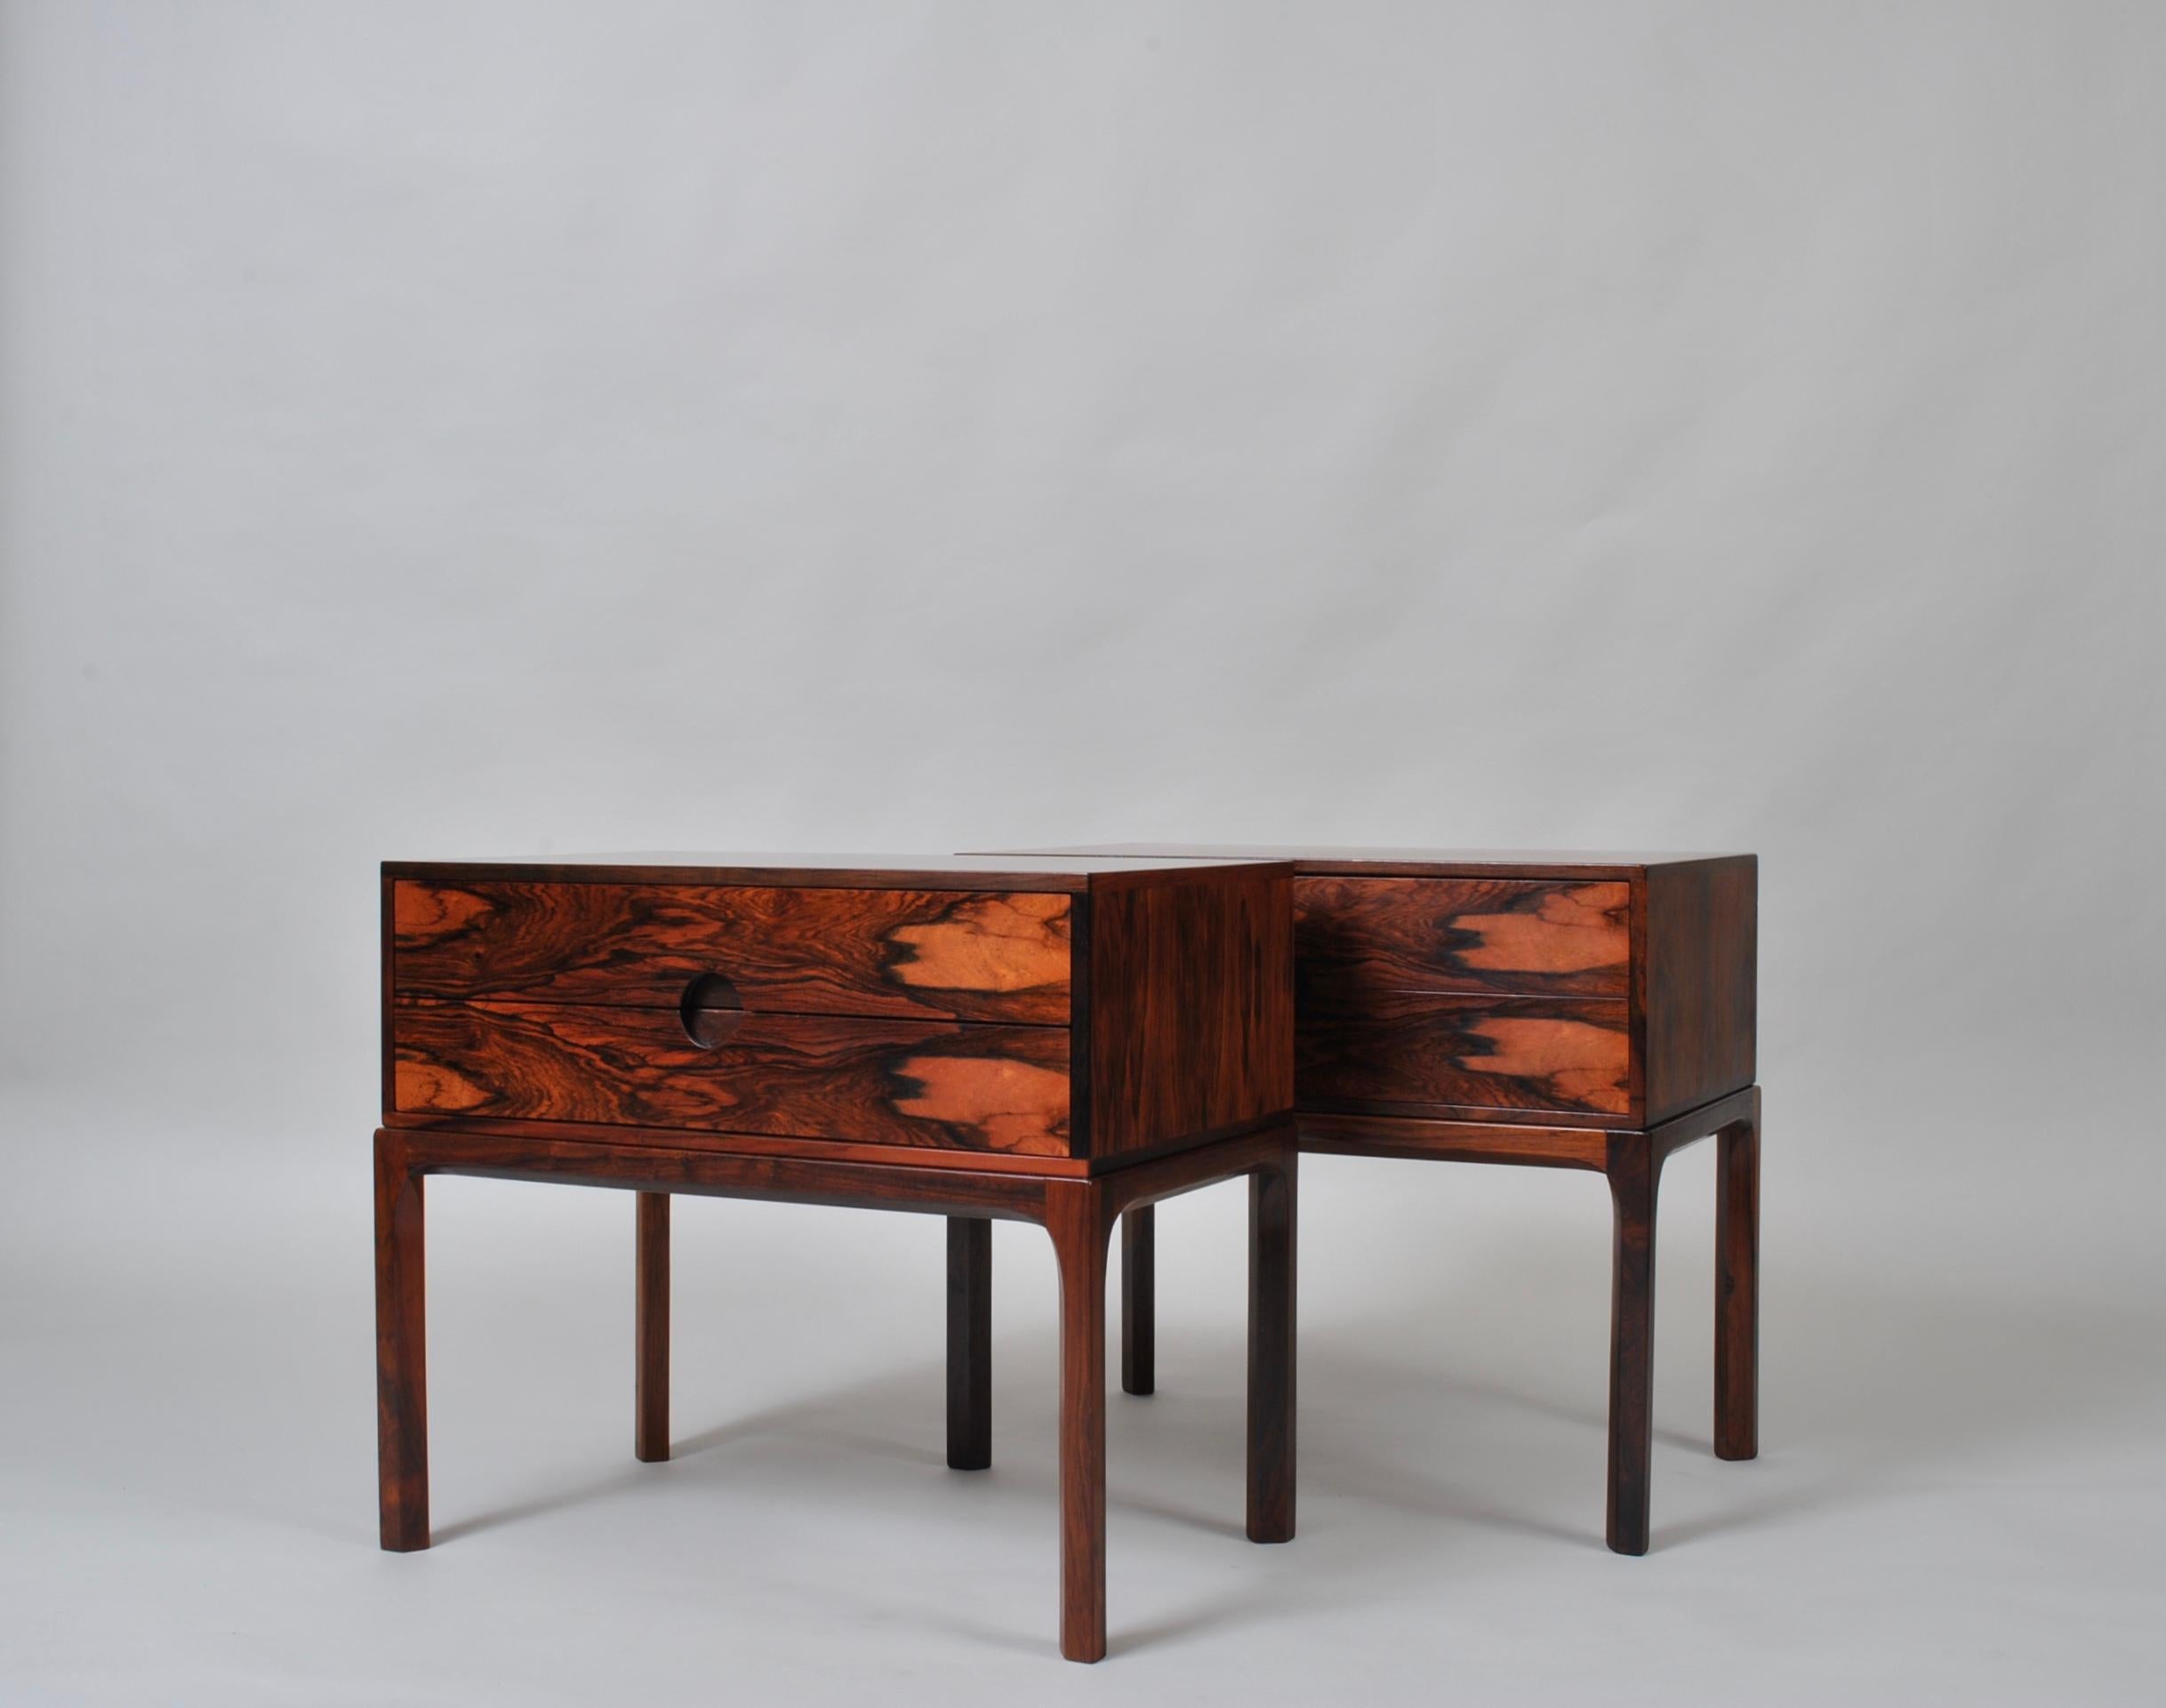 Incredible pair of rare model 384 nightstands or end tables. These were designed by Kai Kristiansen and produced by Aksel Kjersgaard, Odder, Denmark, circa 1960. Superb proportions and design details. Very fine pieces of midcentury furniture design.